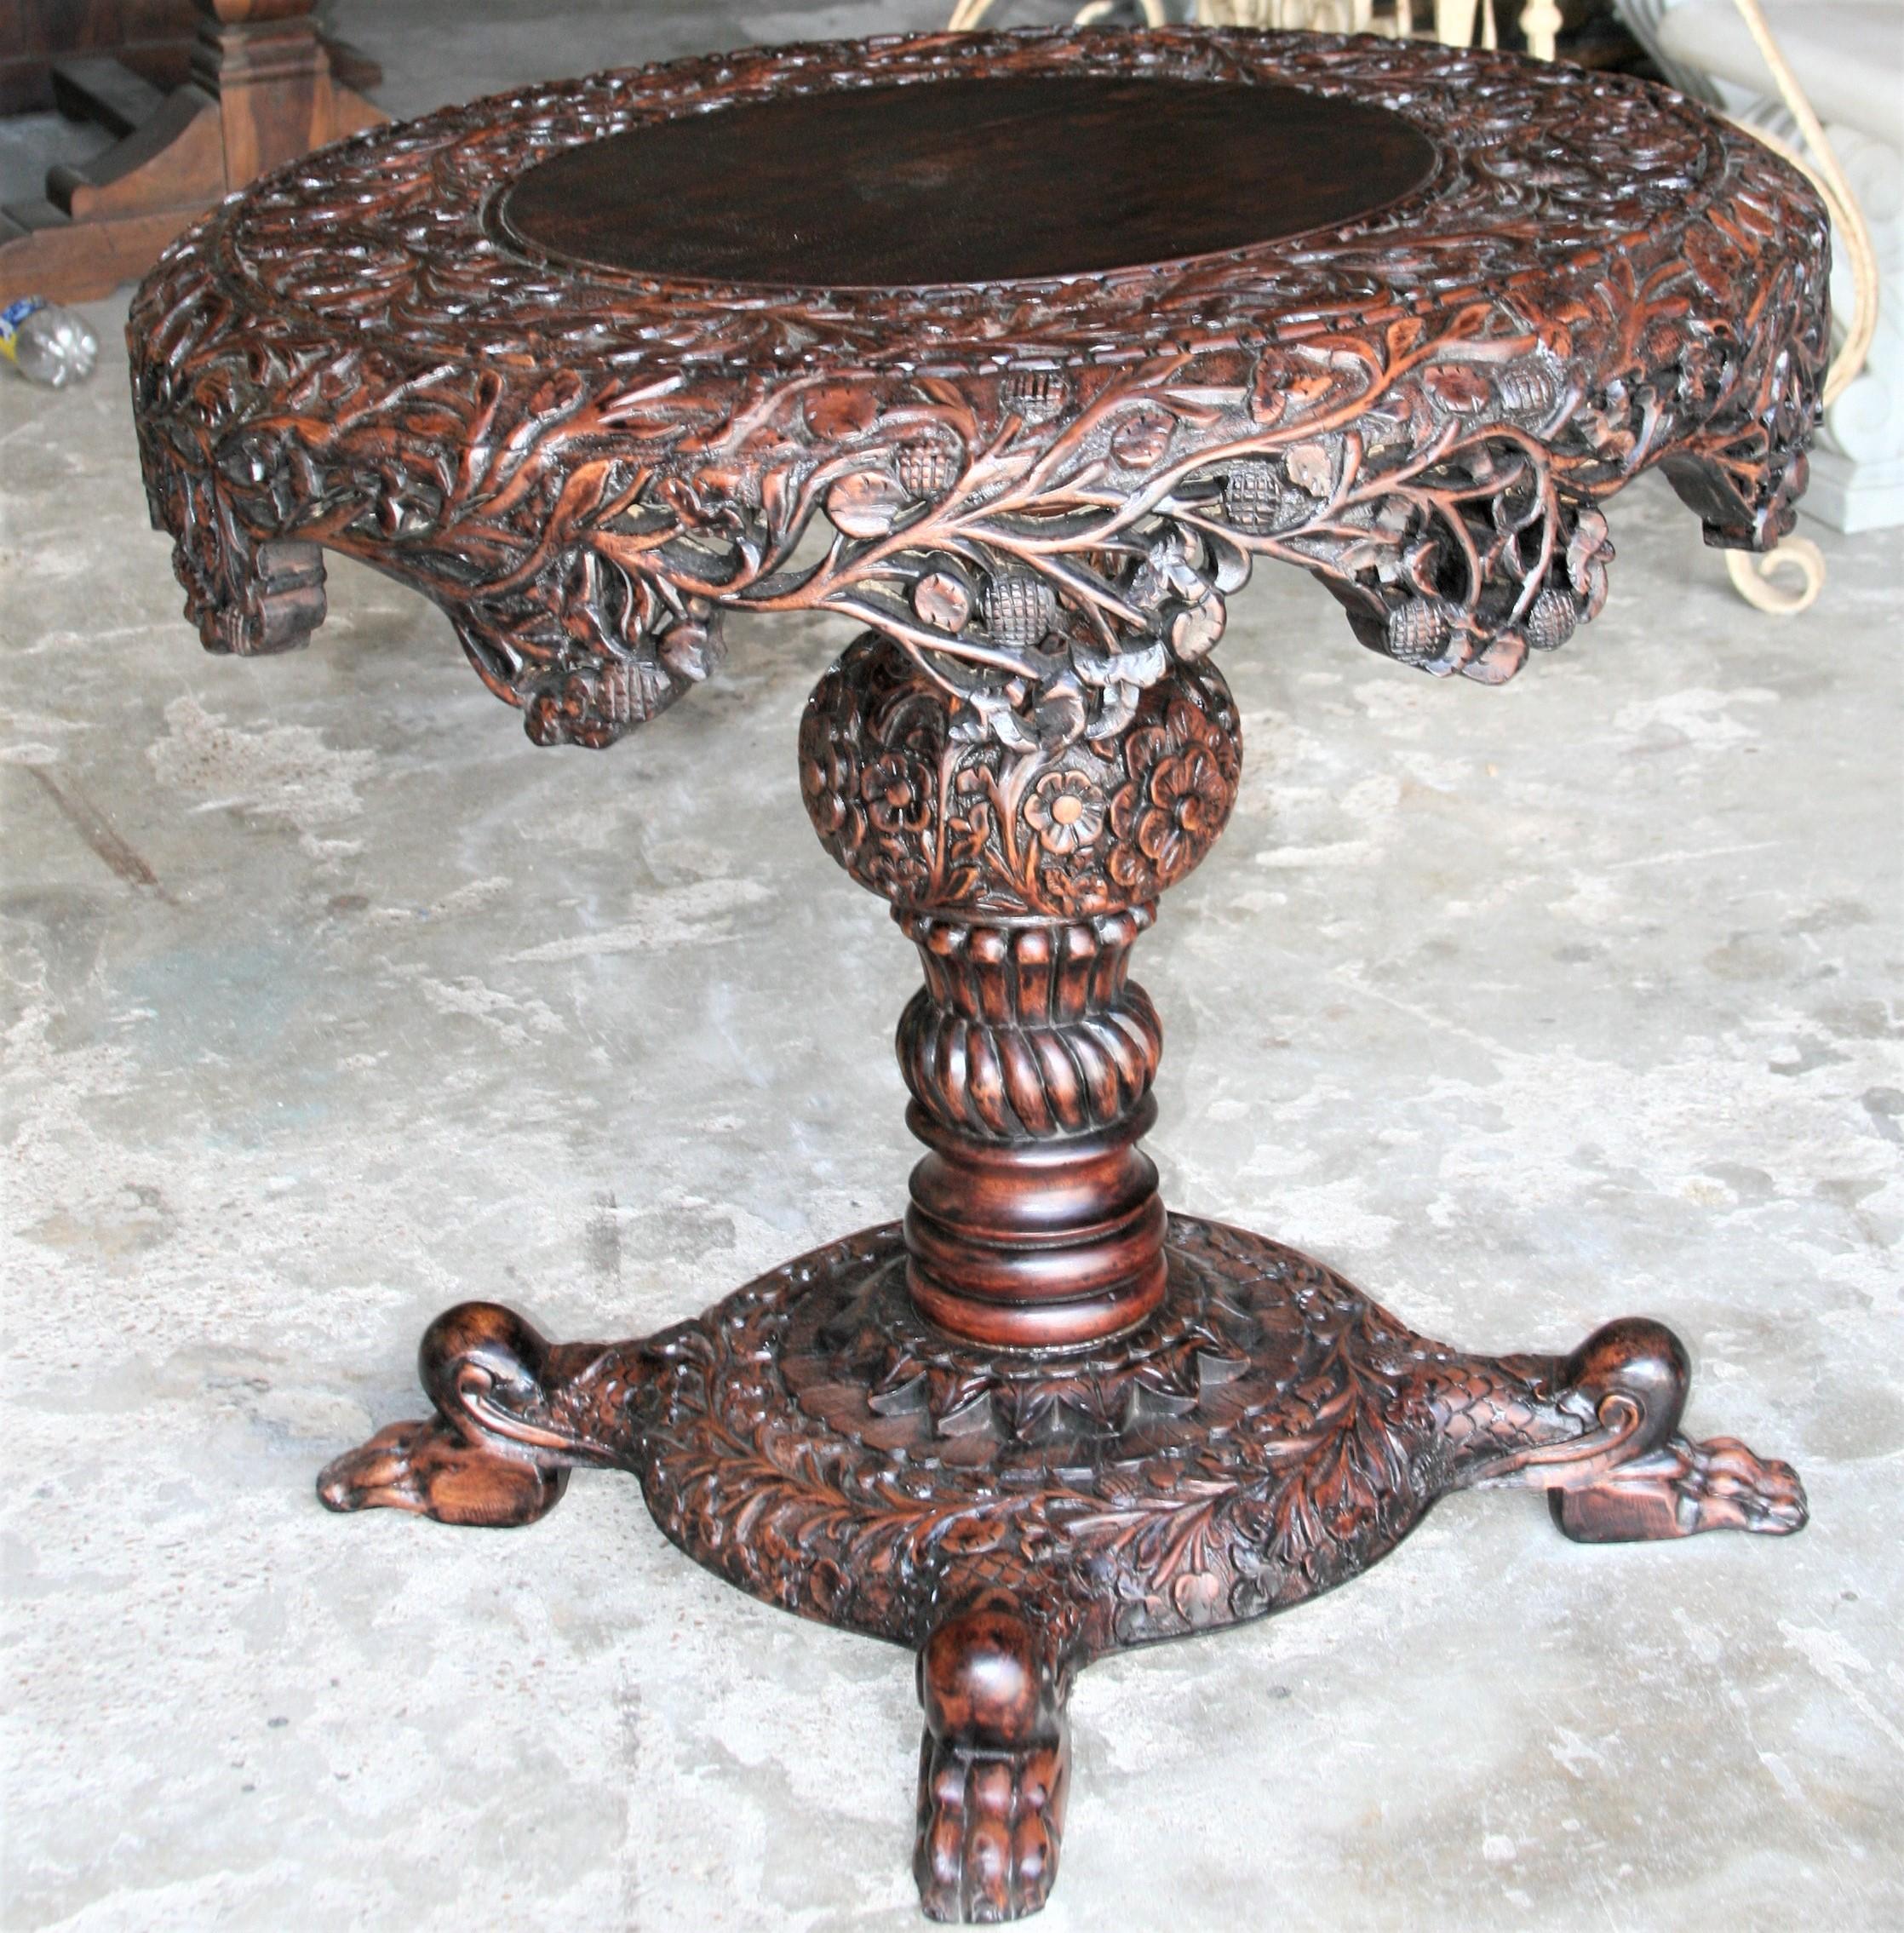 The round top edges with apron are pierce carved. It has carved round columnar support with carved square plinth and paw feet. It is an extraordinary table with precise detailed carving. Seller guarantees the quality and material. Will make an